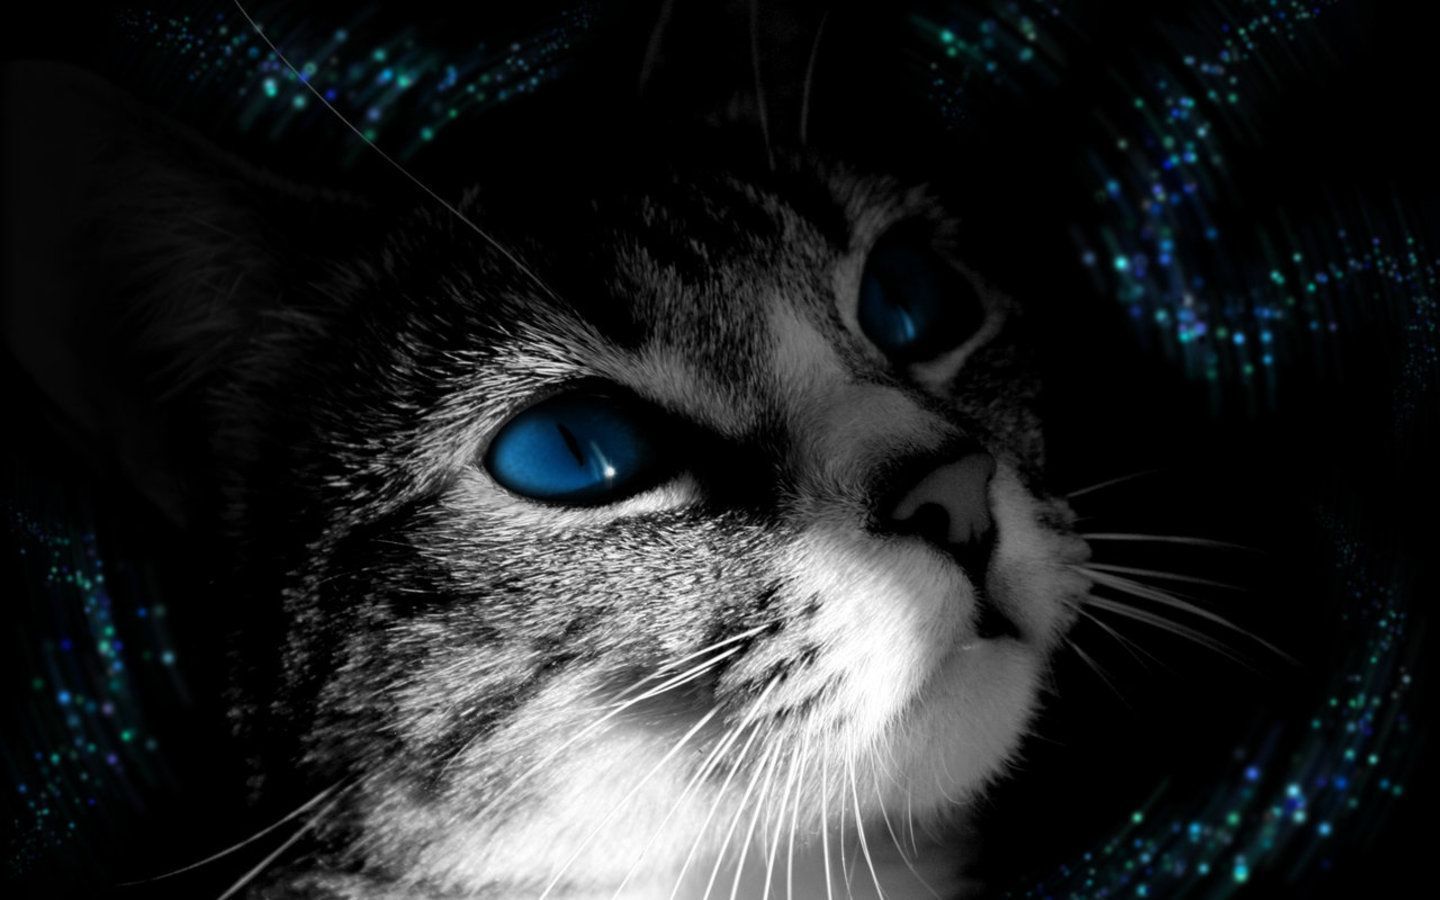 Kitty Blue Eyes Wallpaper - HD Wallpapers Backgrounds of Your Choice